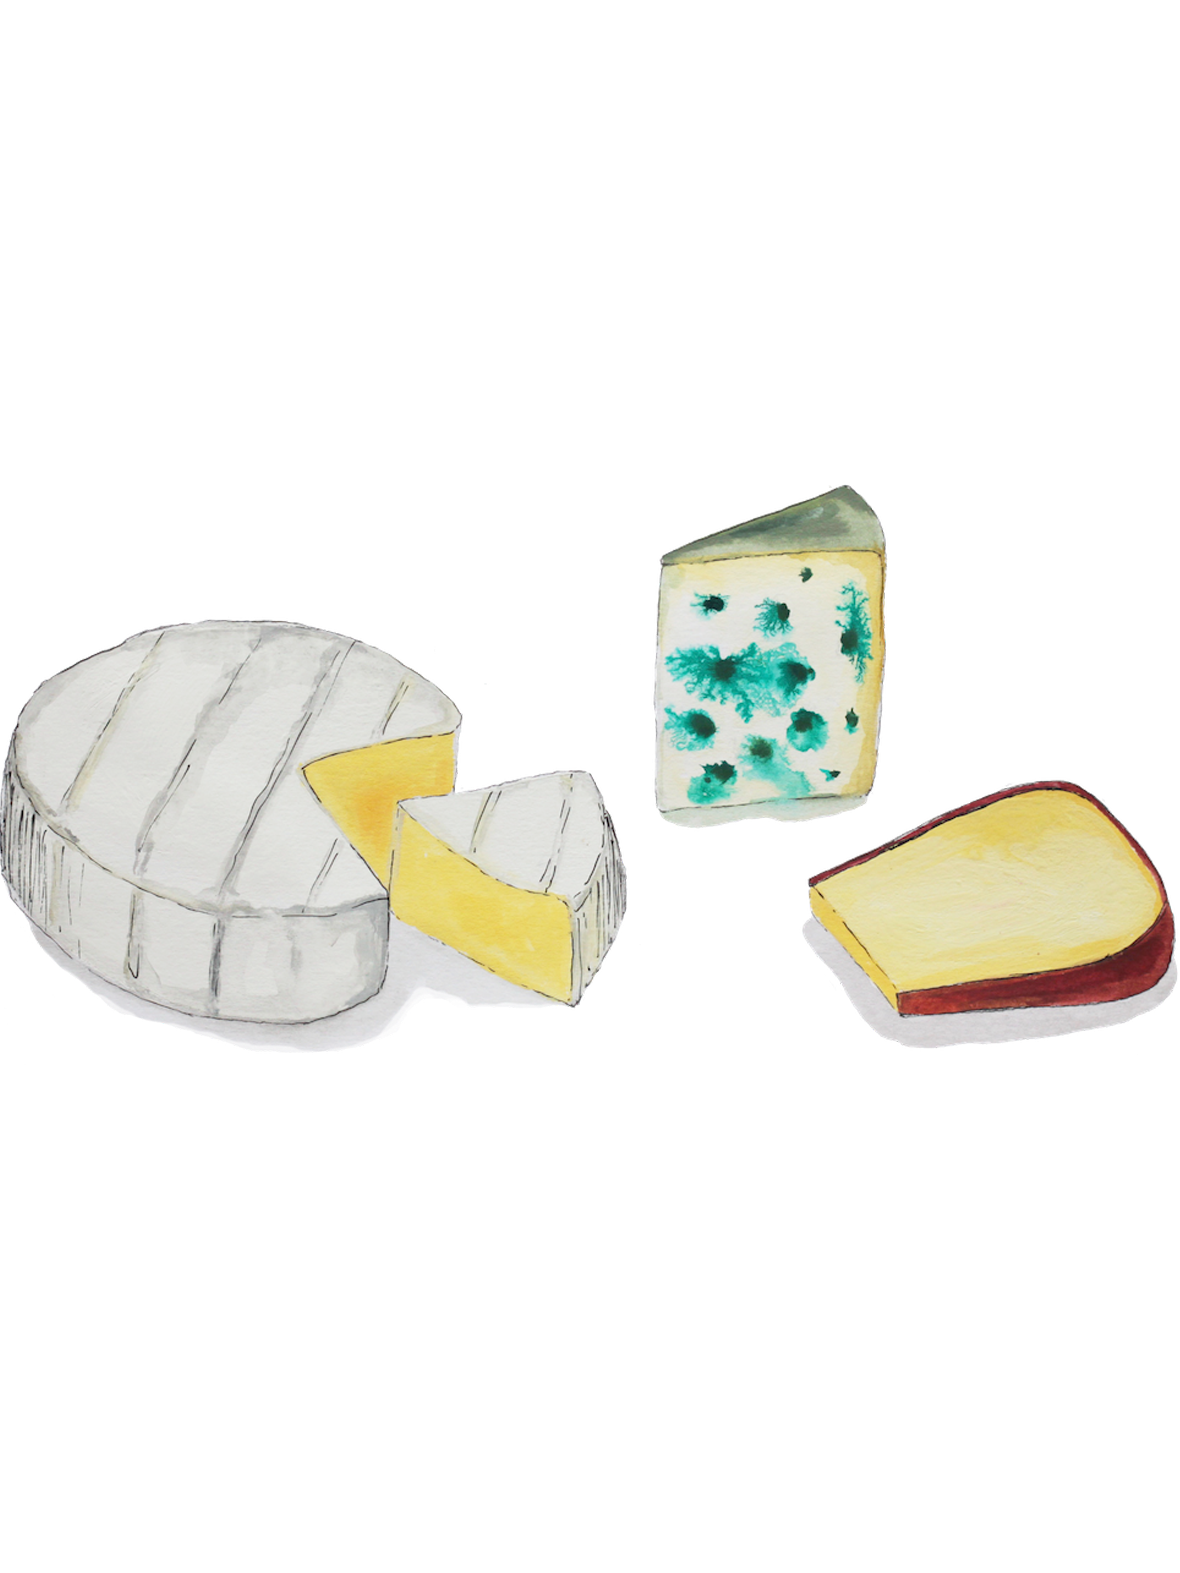 Illustration of a selection of three different cheeses, including Brie, Blue and Edam